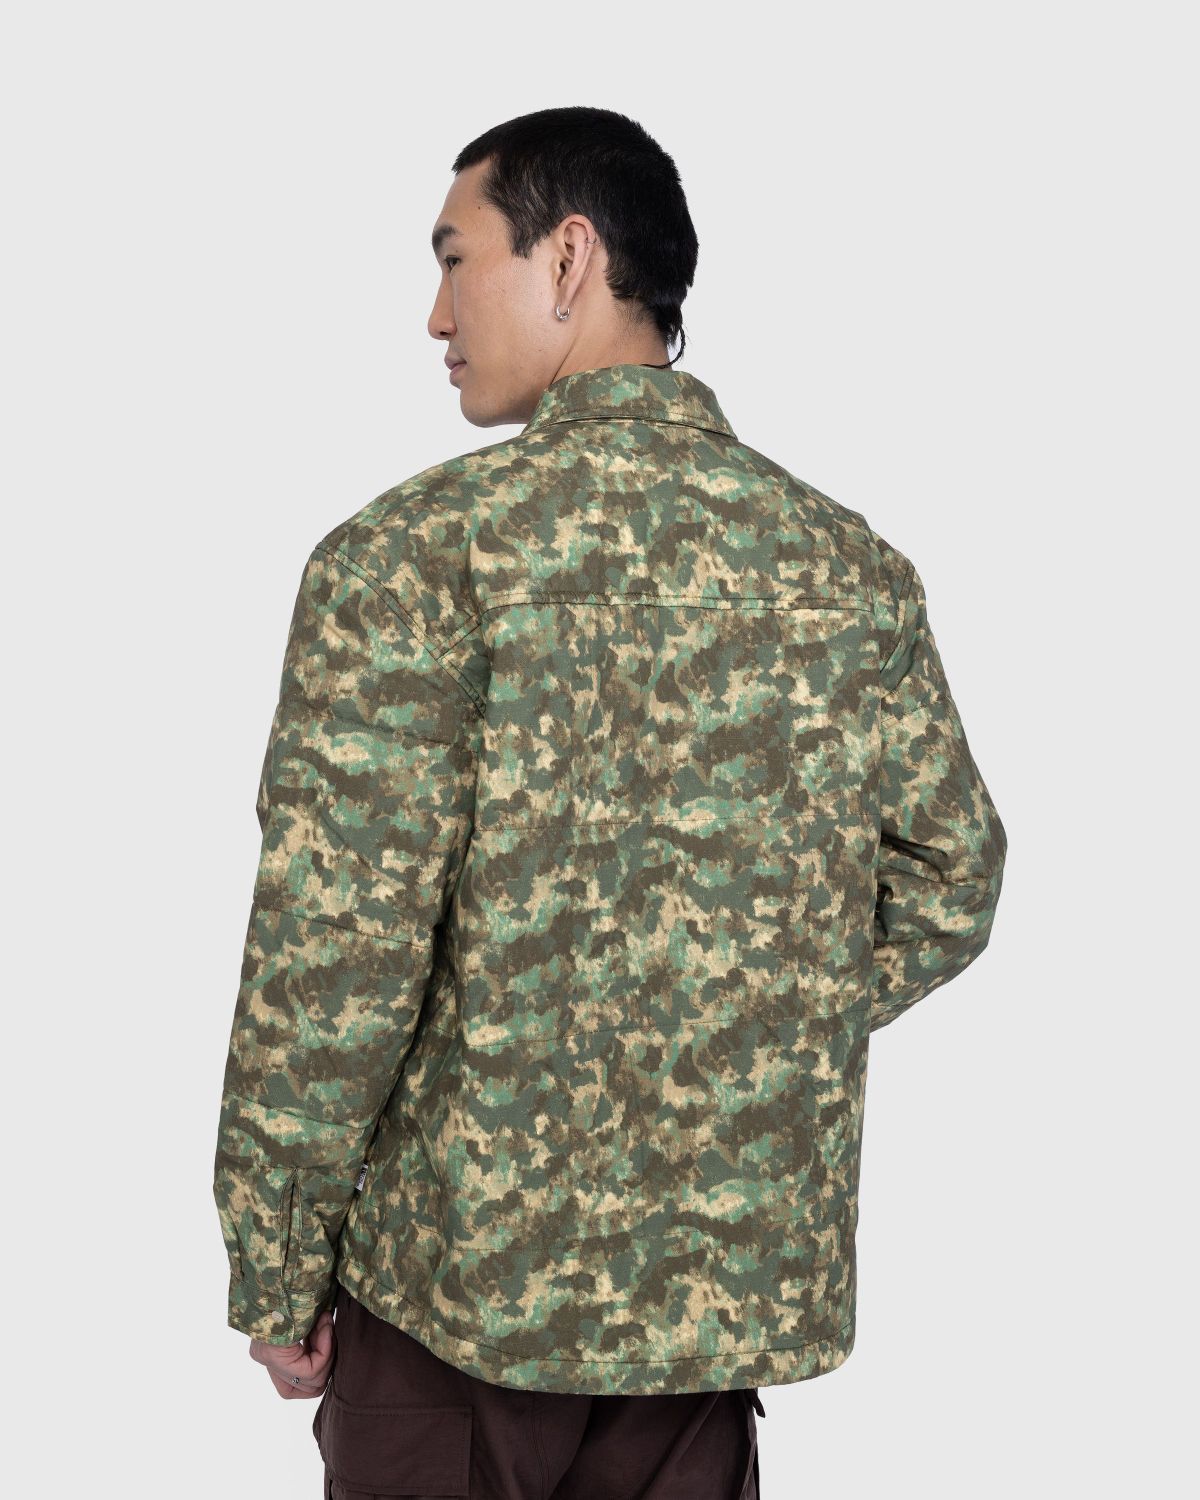 The North Face – M66 Stuffed Shirt Jacket Military Olive/Stippled Camo Print - Outerwear - Green - Image 3